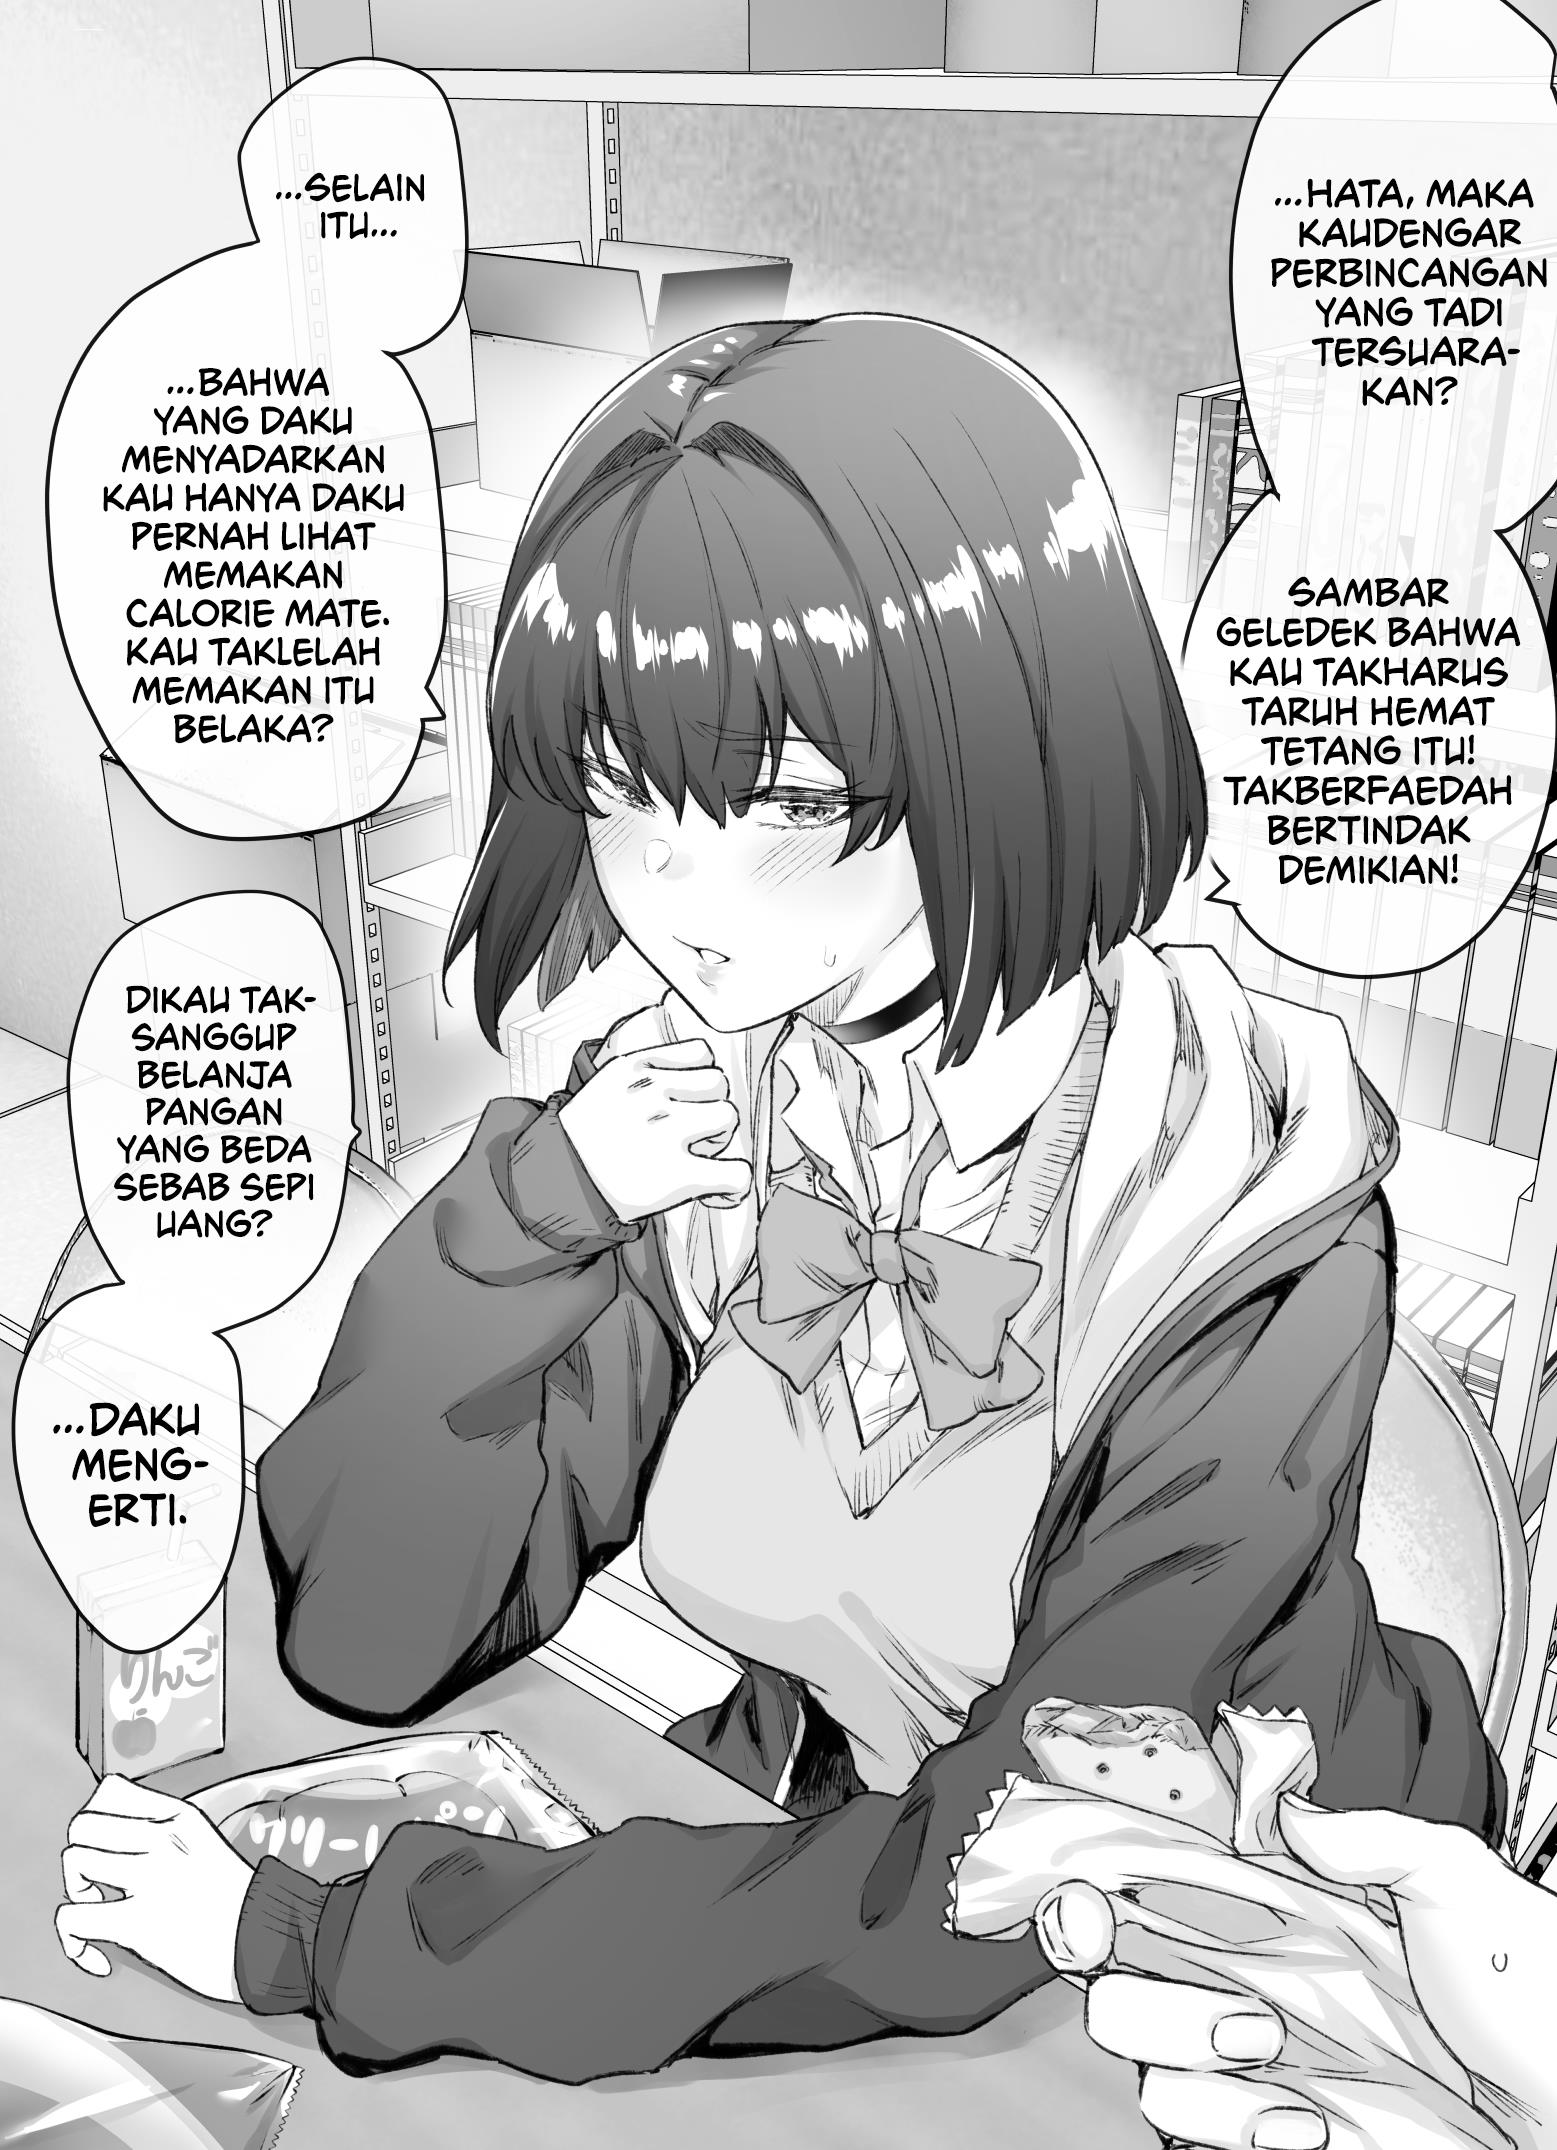 The Tsuntsuntsuntsuntsuntsun tsuntsuntsuntsuntsundere Girl Getting Less and Less Tsun Day by Day Chapter 16.1